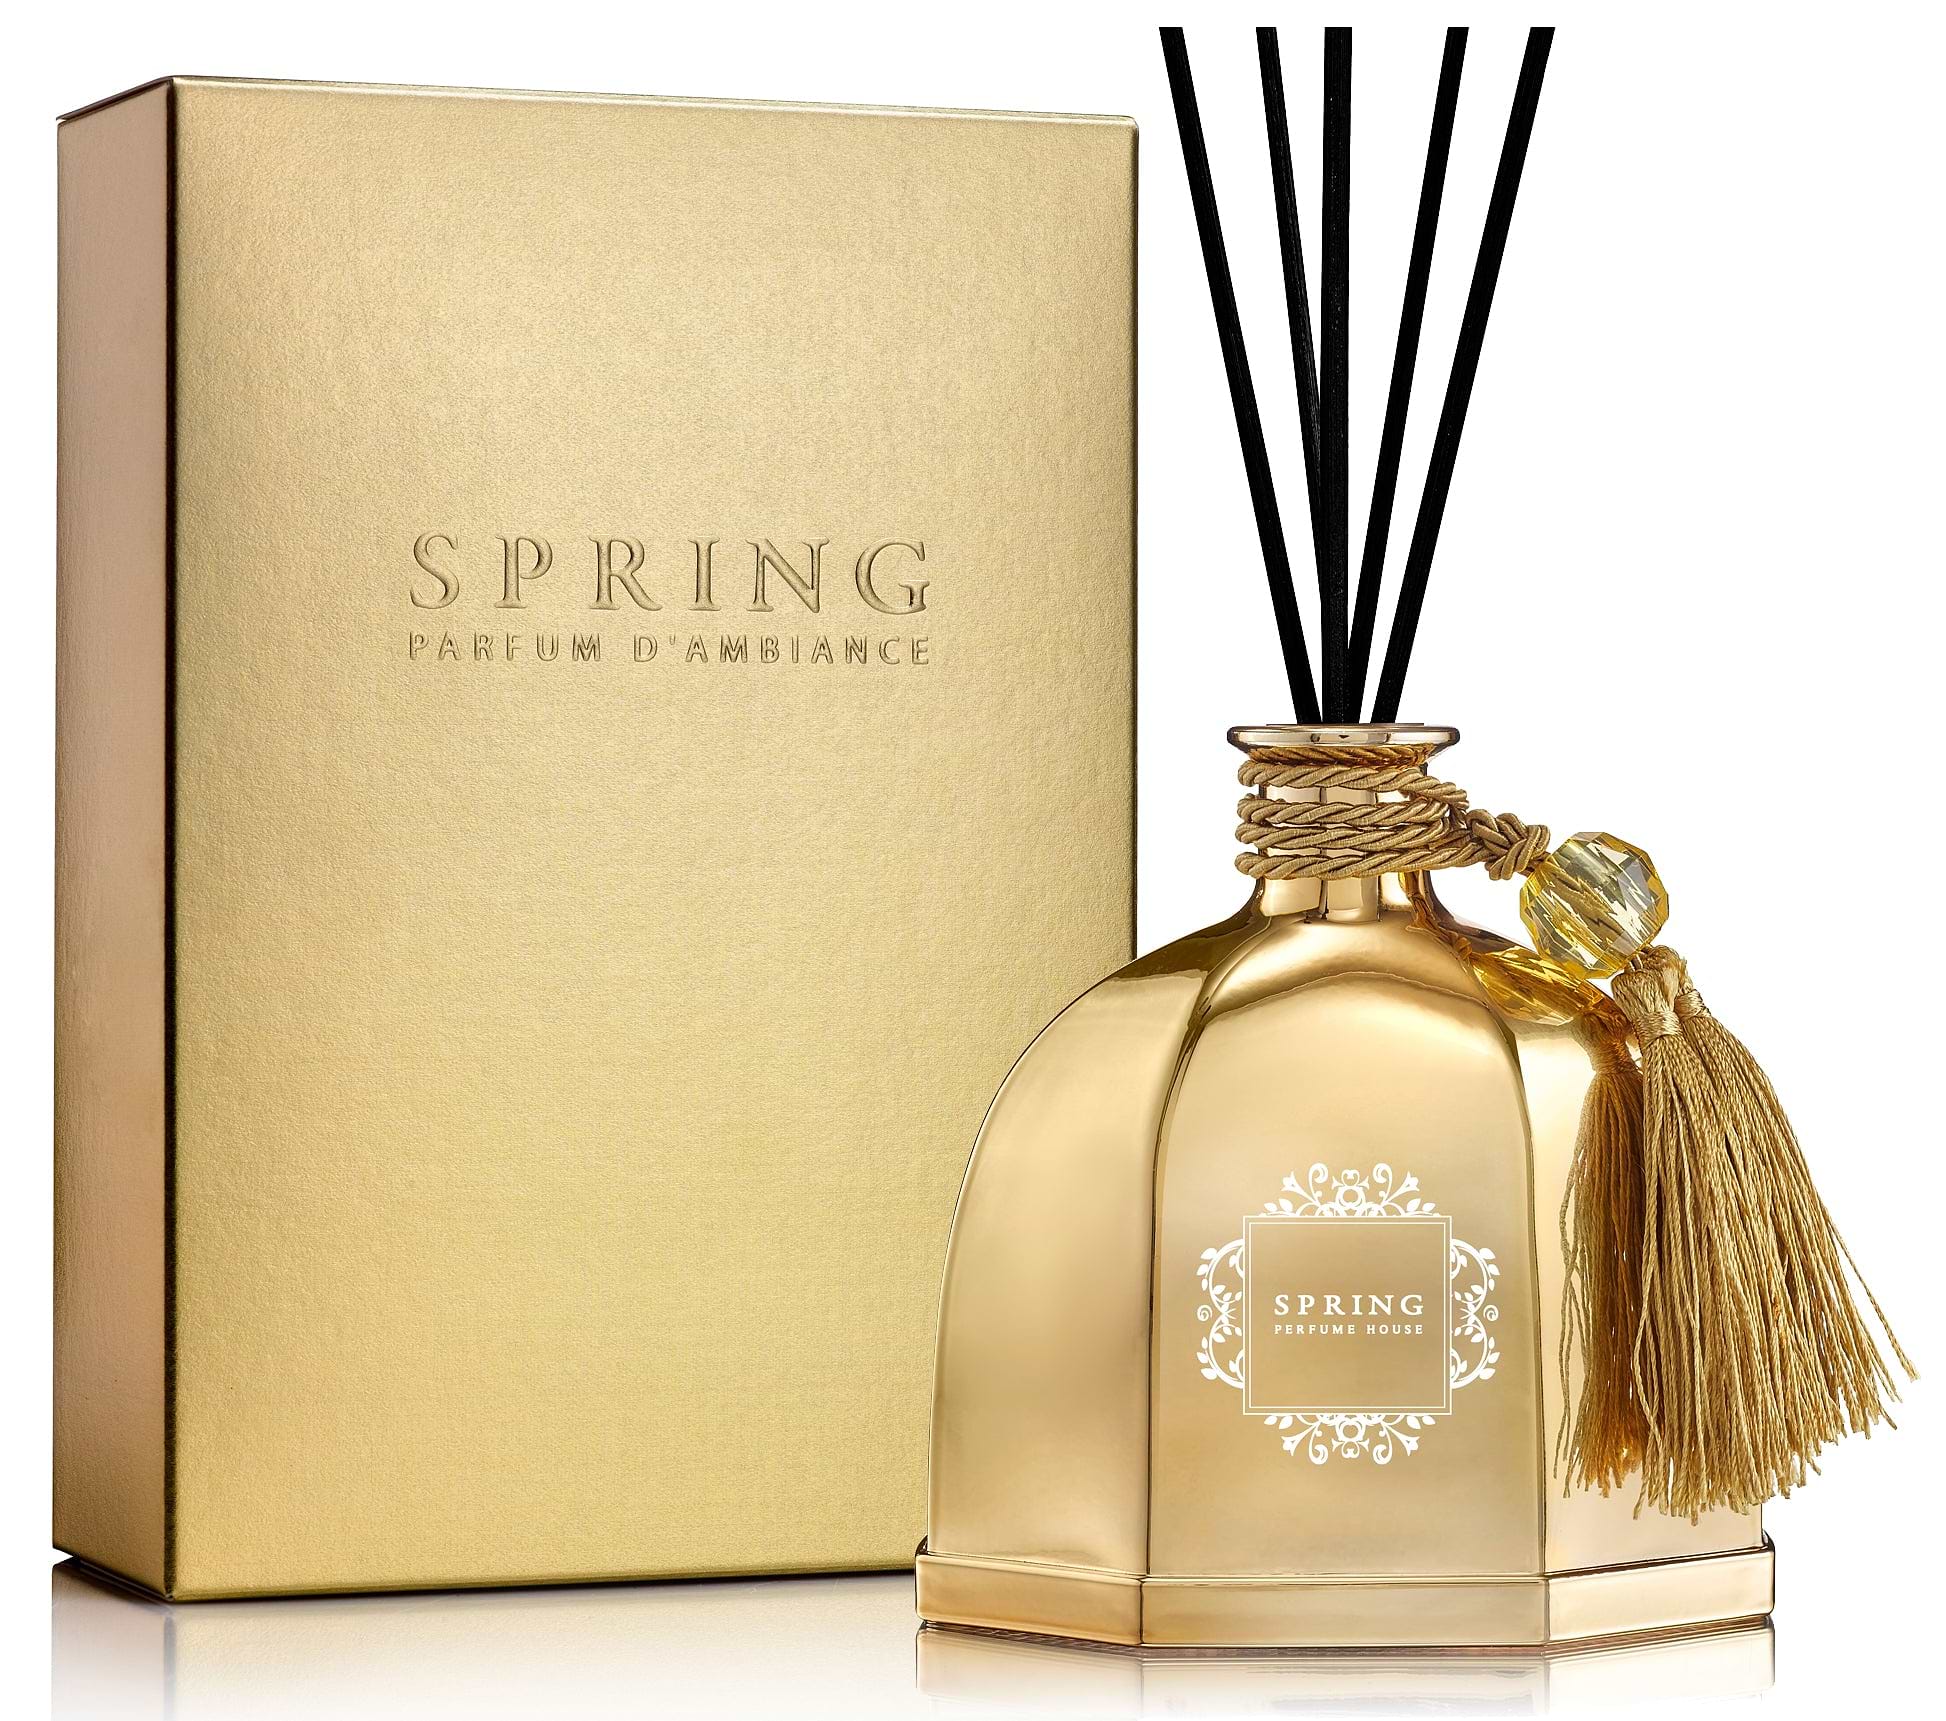 SPRING Fragrance Golden Reed Diffuser Set | Very Large 10.14 Oz | Fragrance Made in France - White Flower fragrance | Room Air Freshener | Alcohol free and VOC Compliant